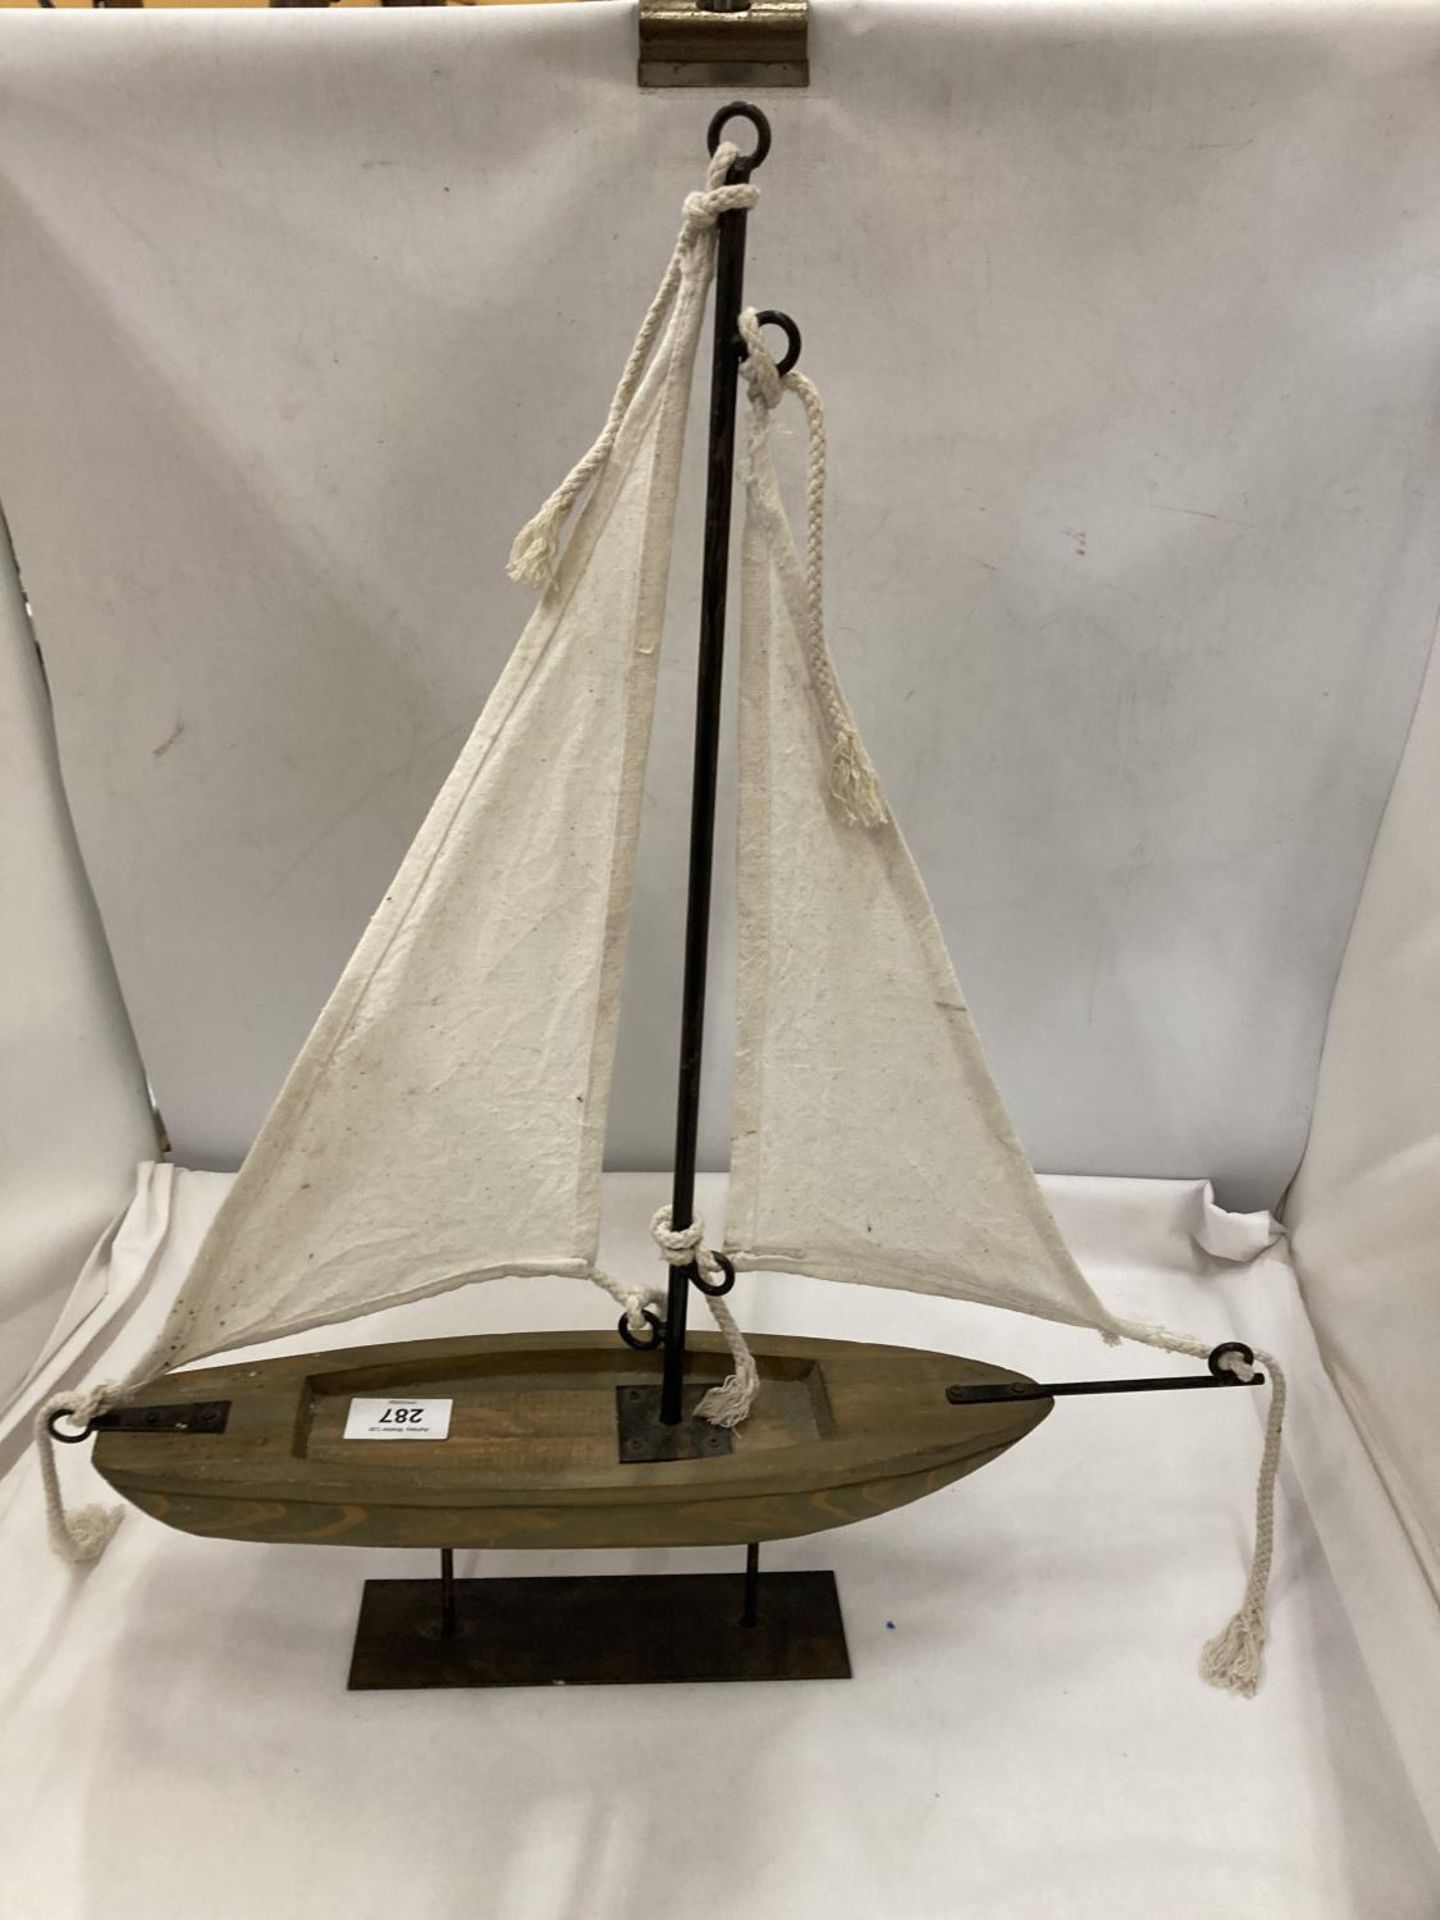 A VINTAGE WOODEN SAILING BOAT ON A DISPLAY PLINT, HEIGHT 56CM, LENGTH 46CM - Image 2 of 3